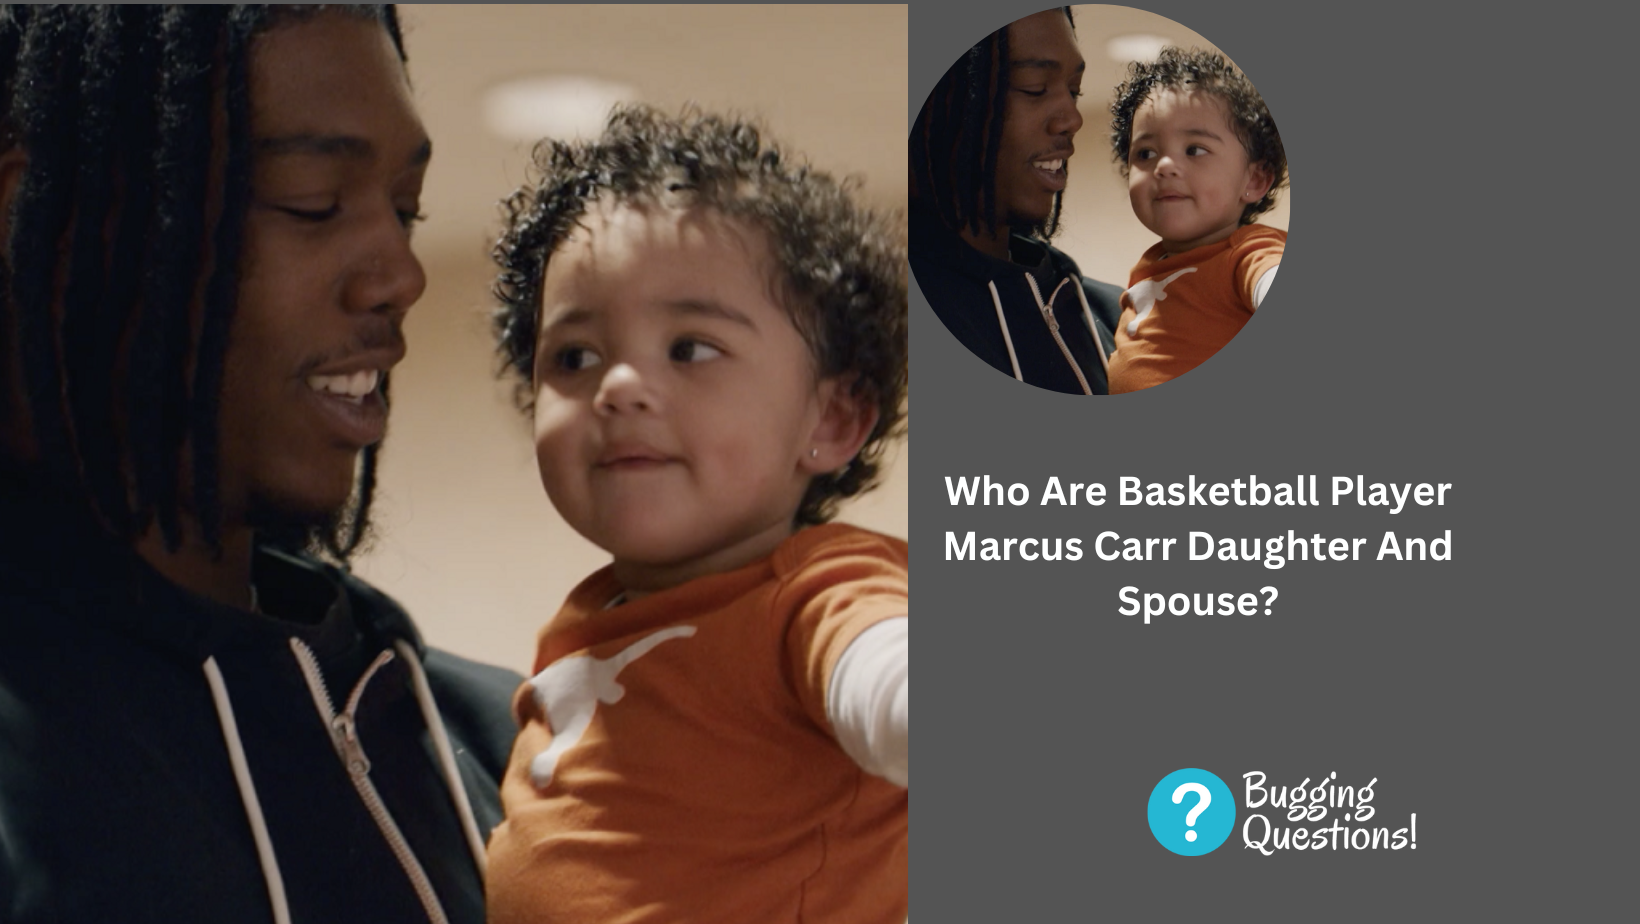 Who Are Basketball Player Marcus Carr Daughter And Spouse?